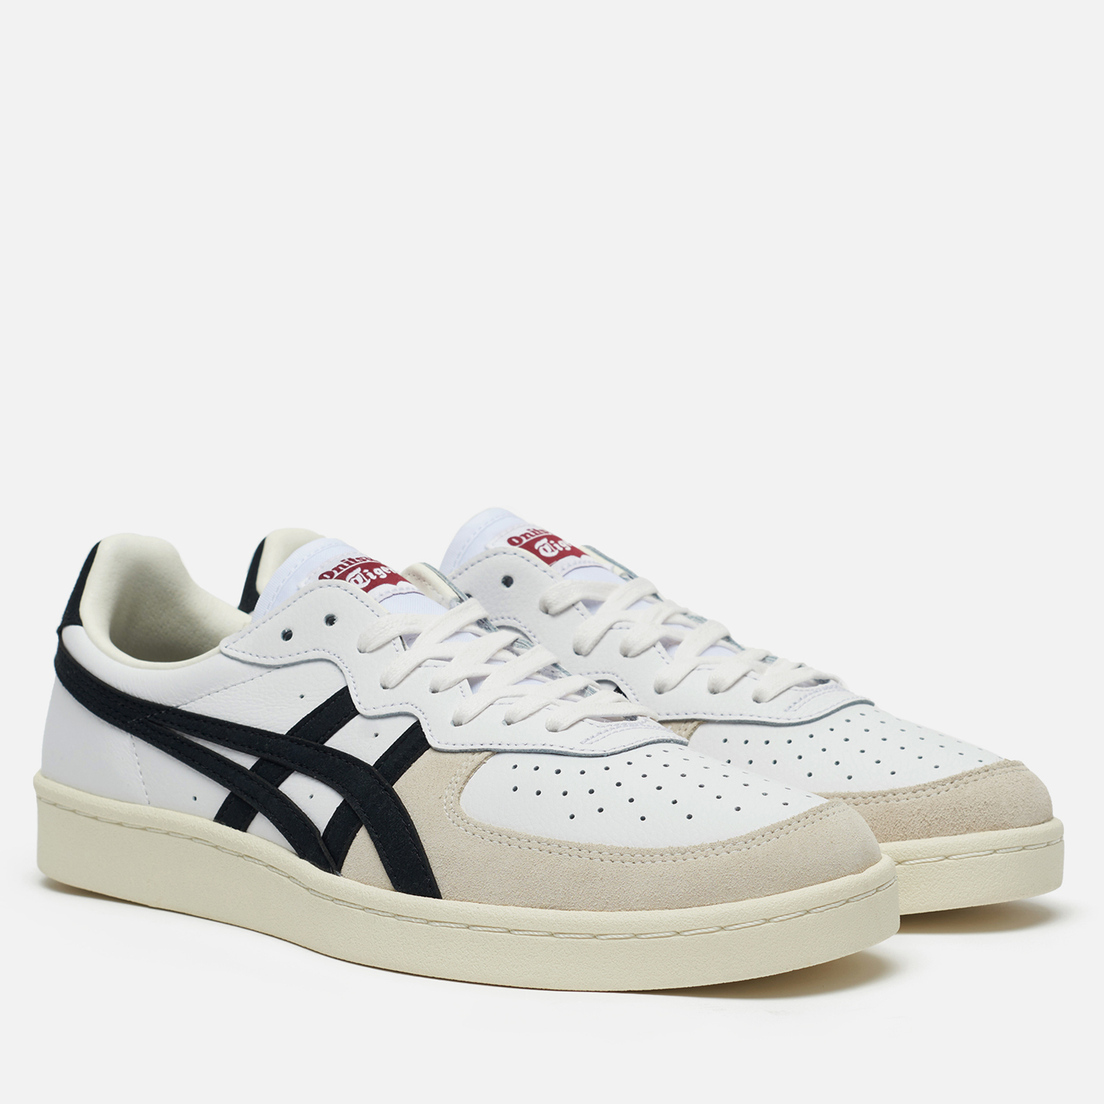 onitsuka tiger from which country